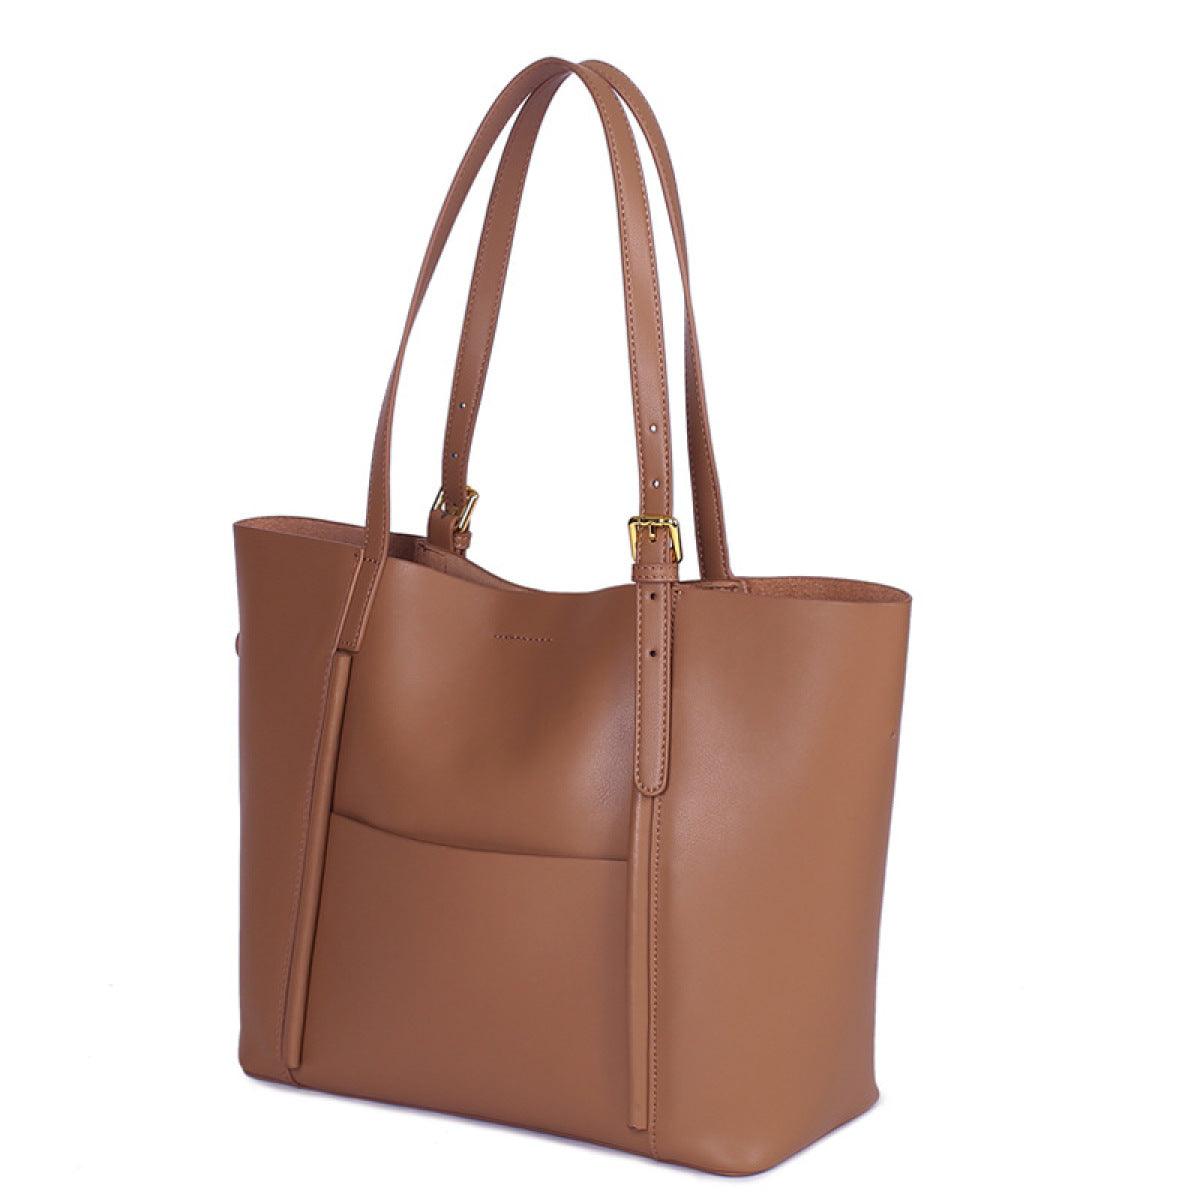 Stay Fashionable While Carrying Everything You Need With Our High Capacity Tote Shoulder Bag With Zipper